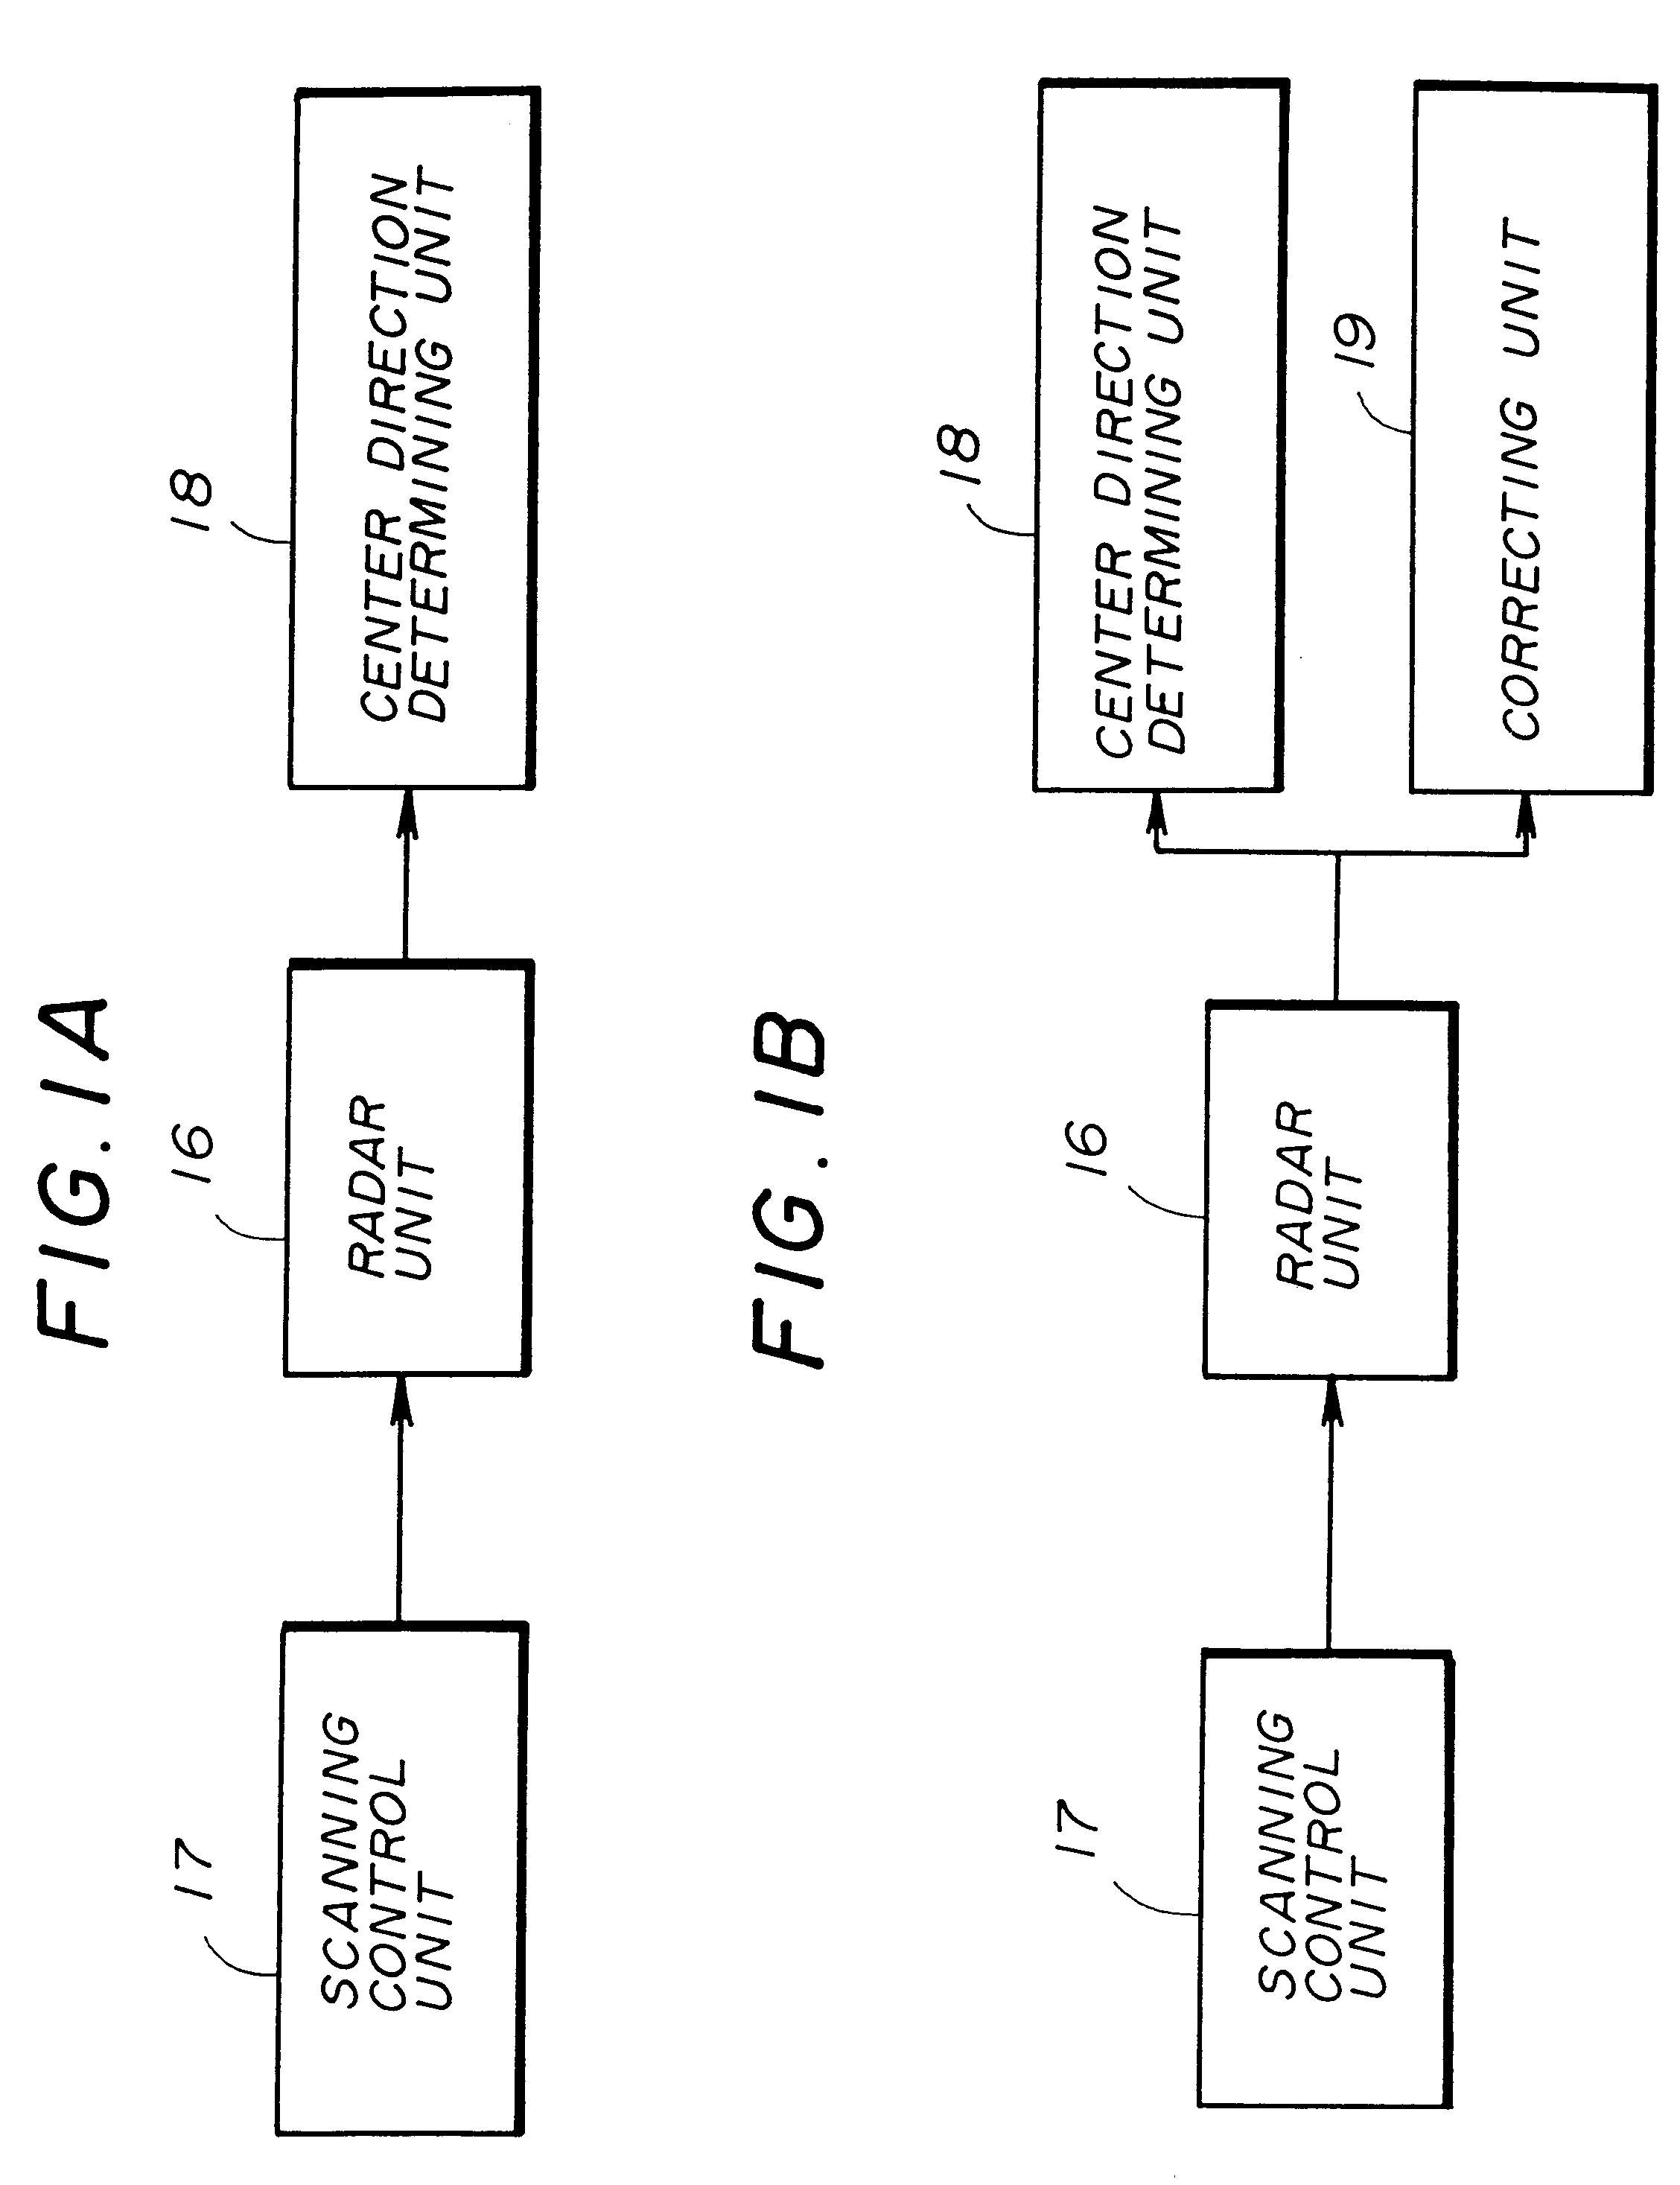 Radar apparatus for detecting a direction of a center of a target